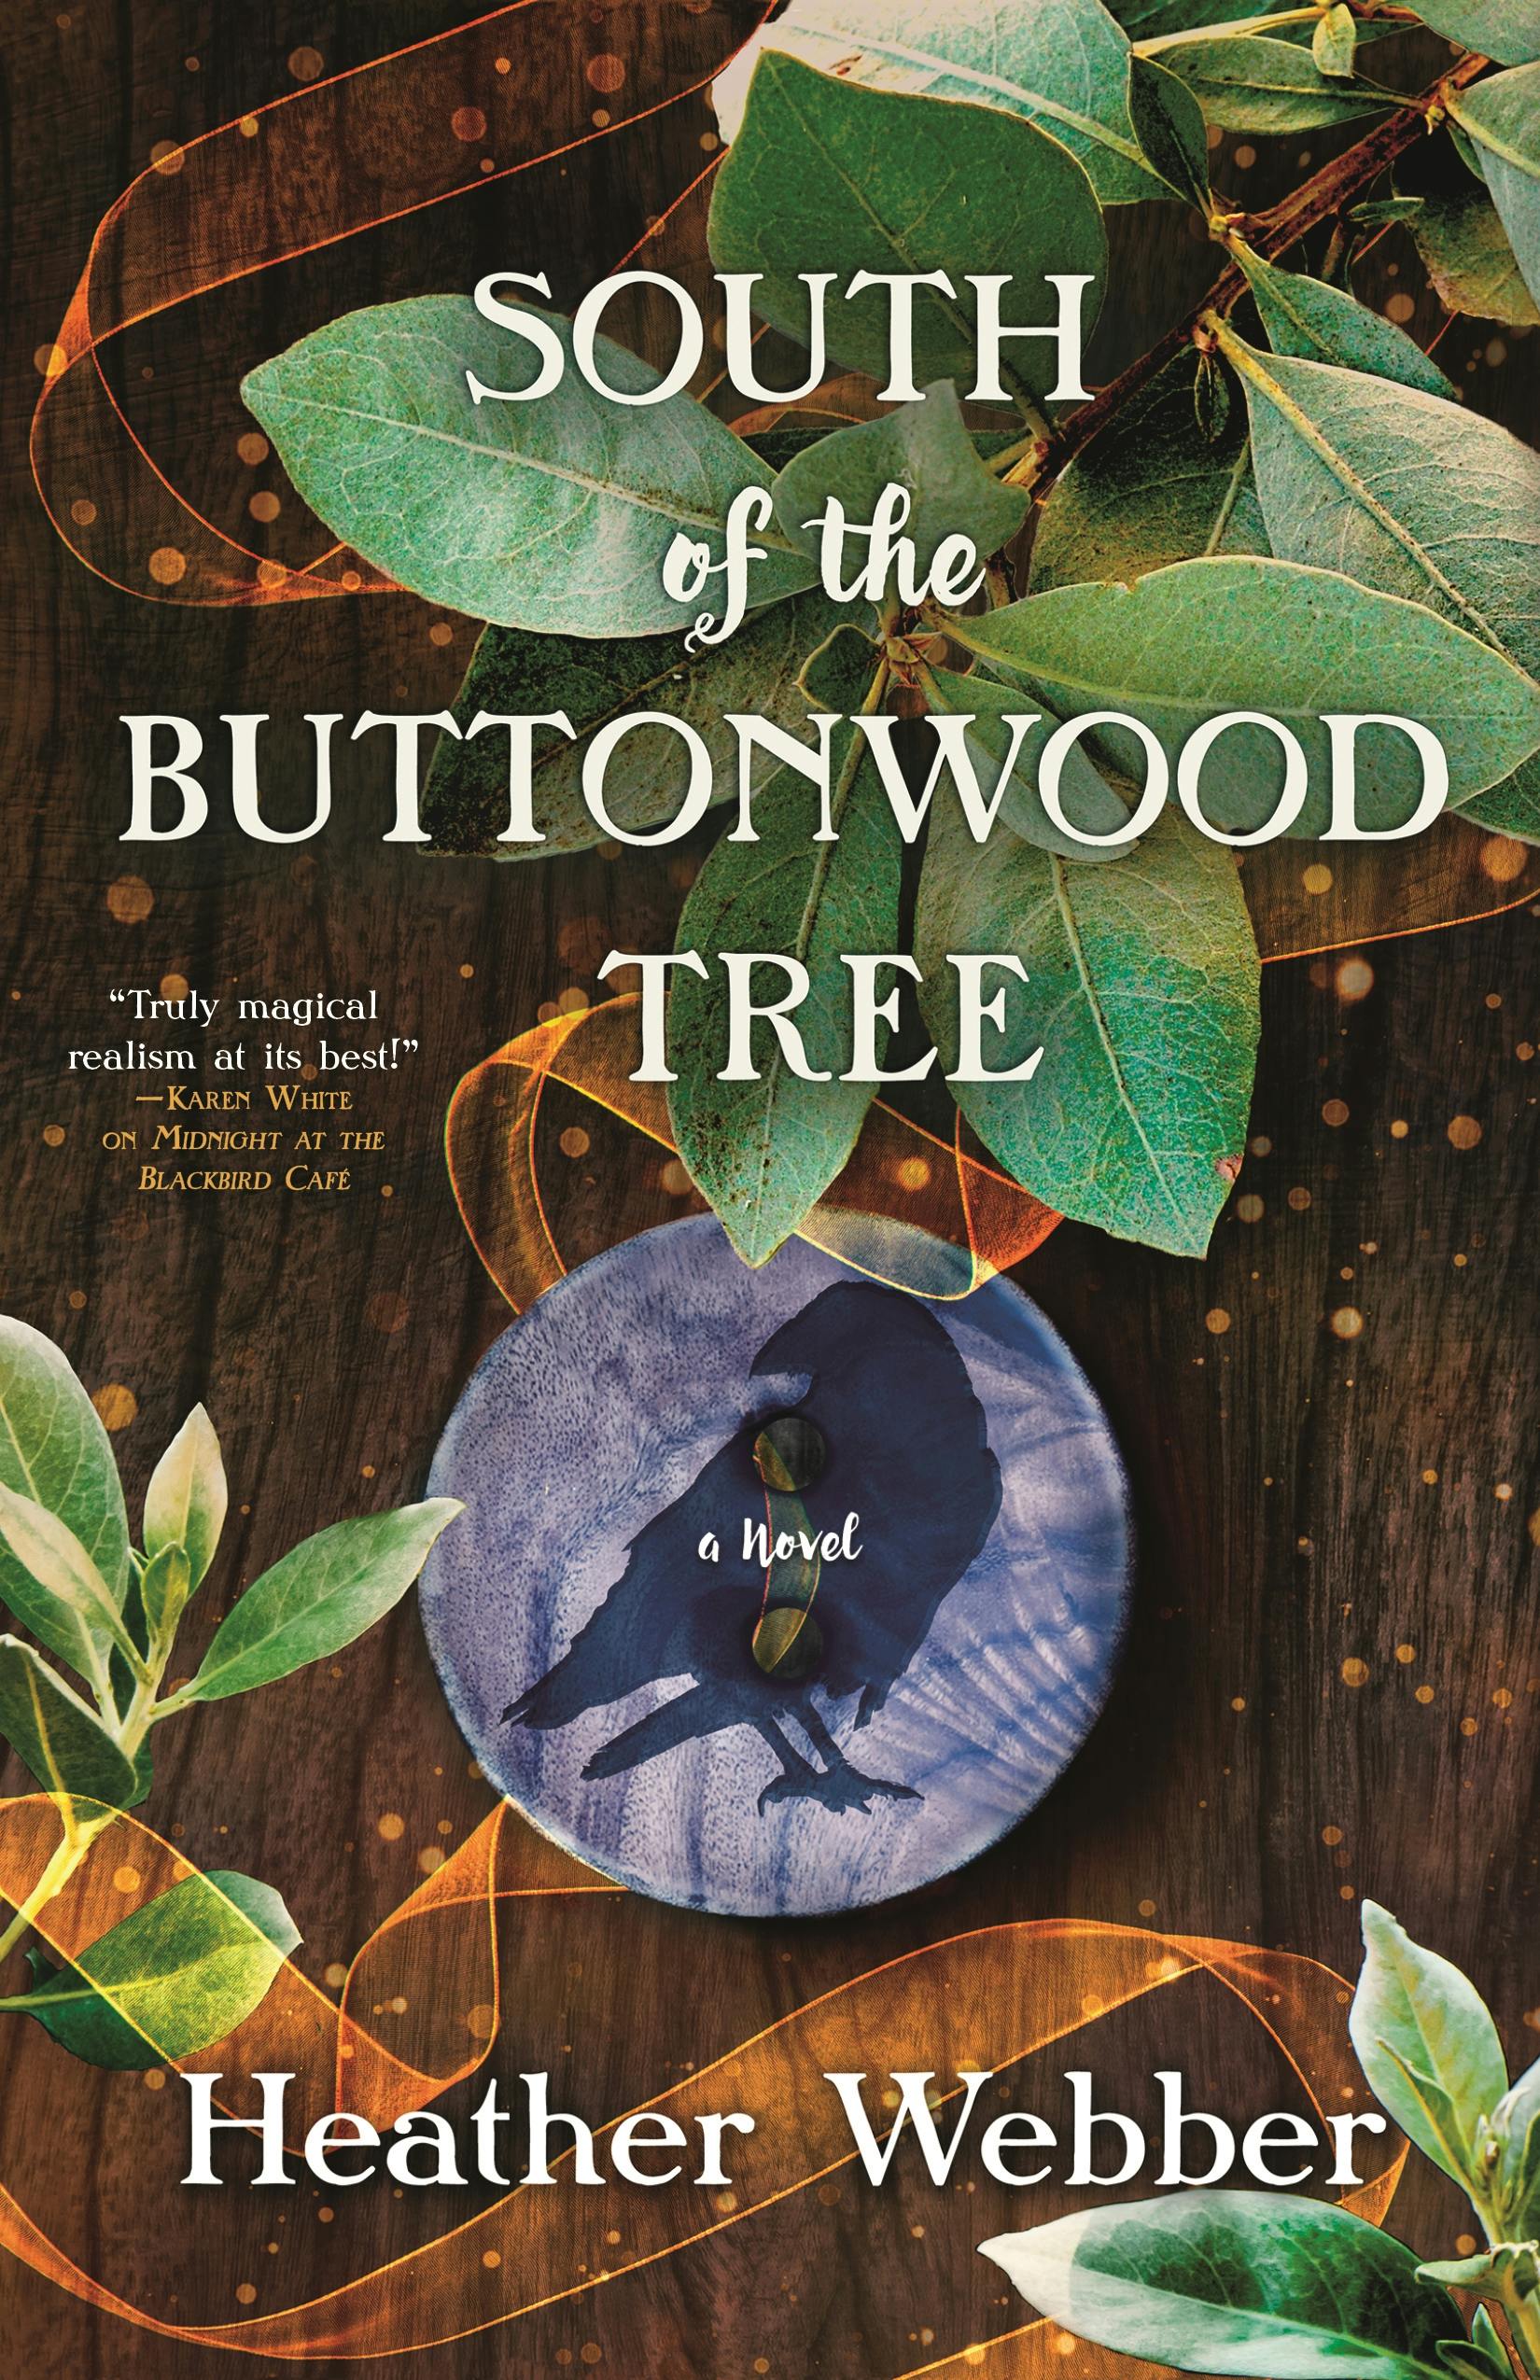 Cover for the book titled as: South of the Buttonwood Tree